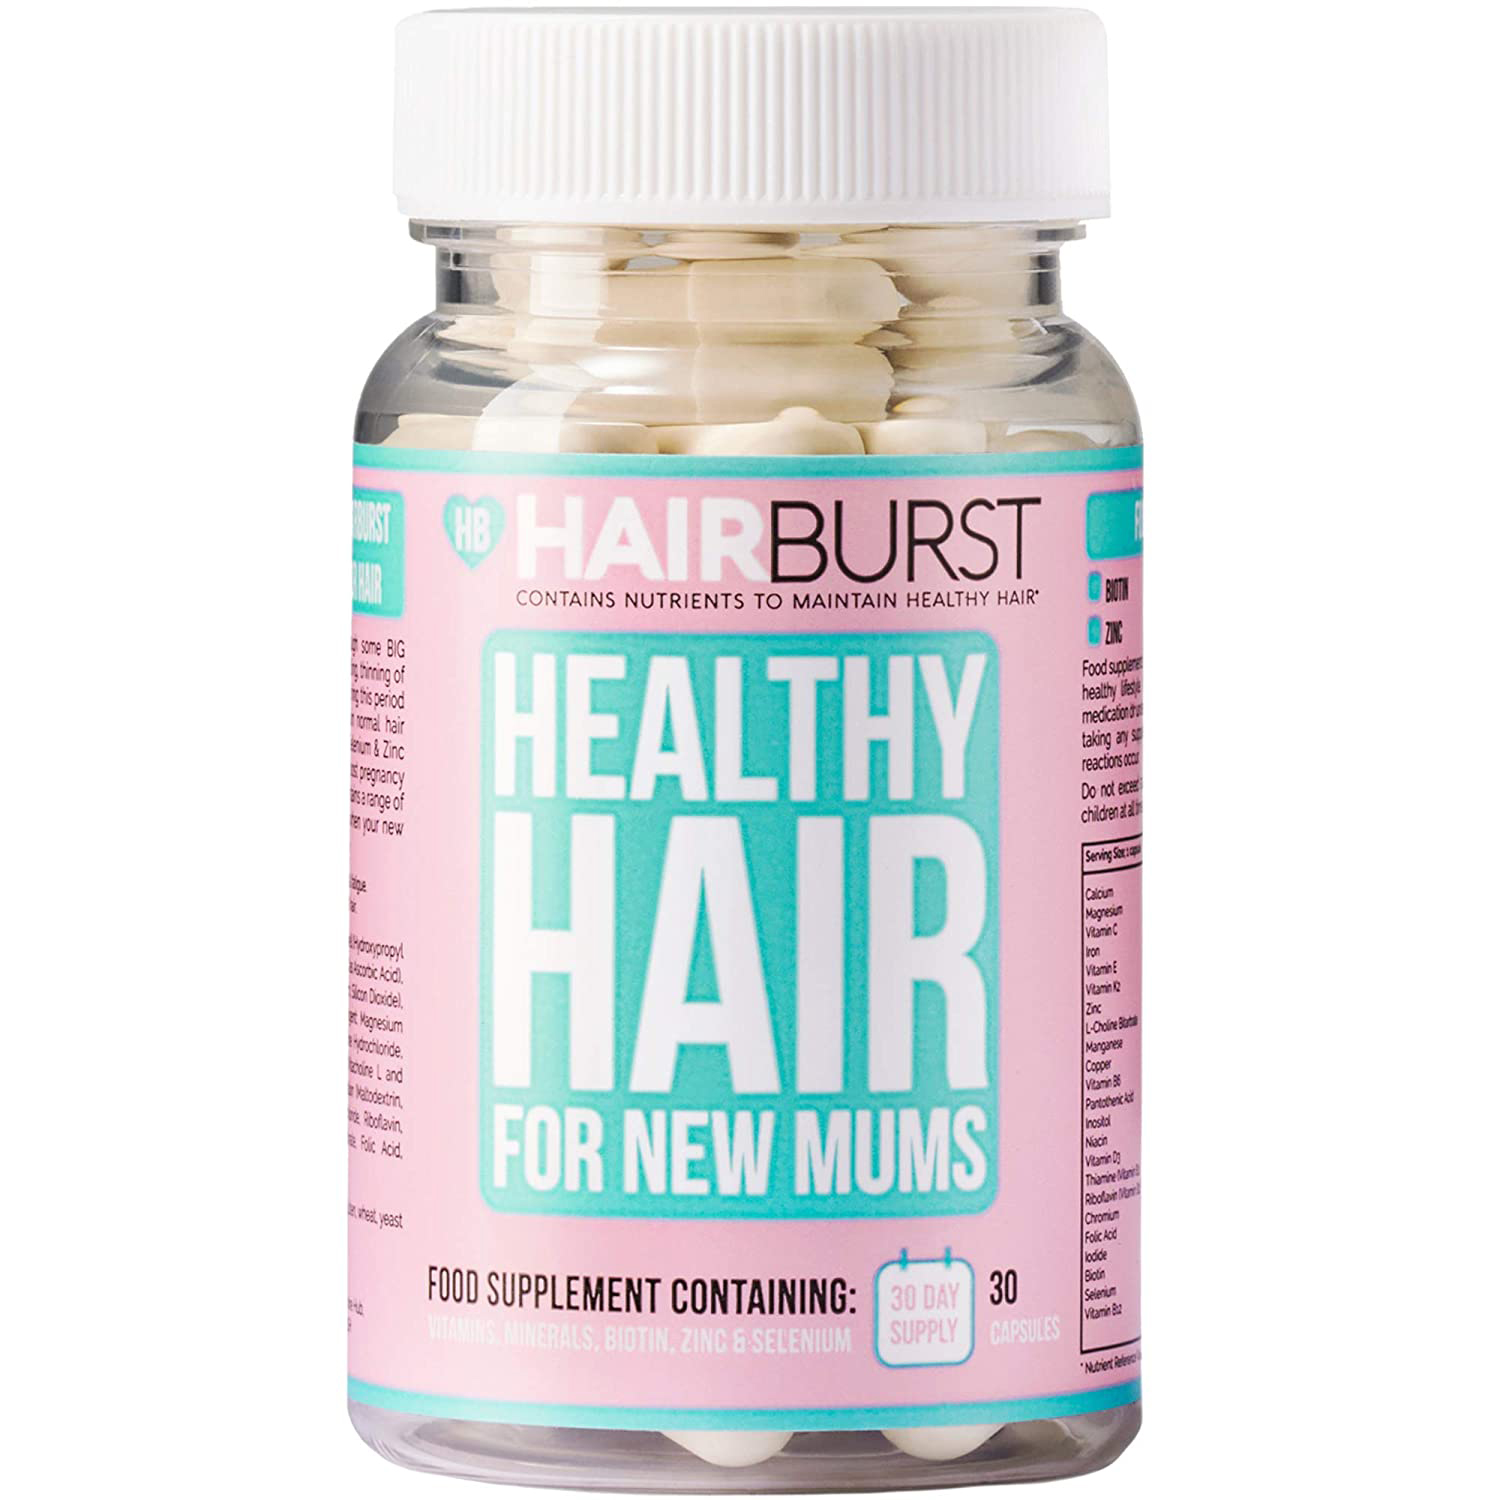 Hairburst Healthy Hair for New Mums